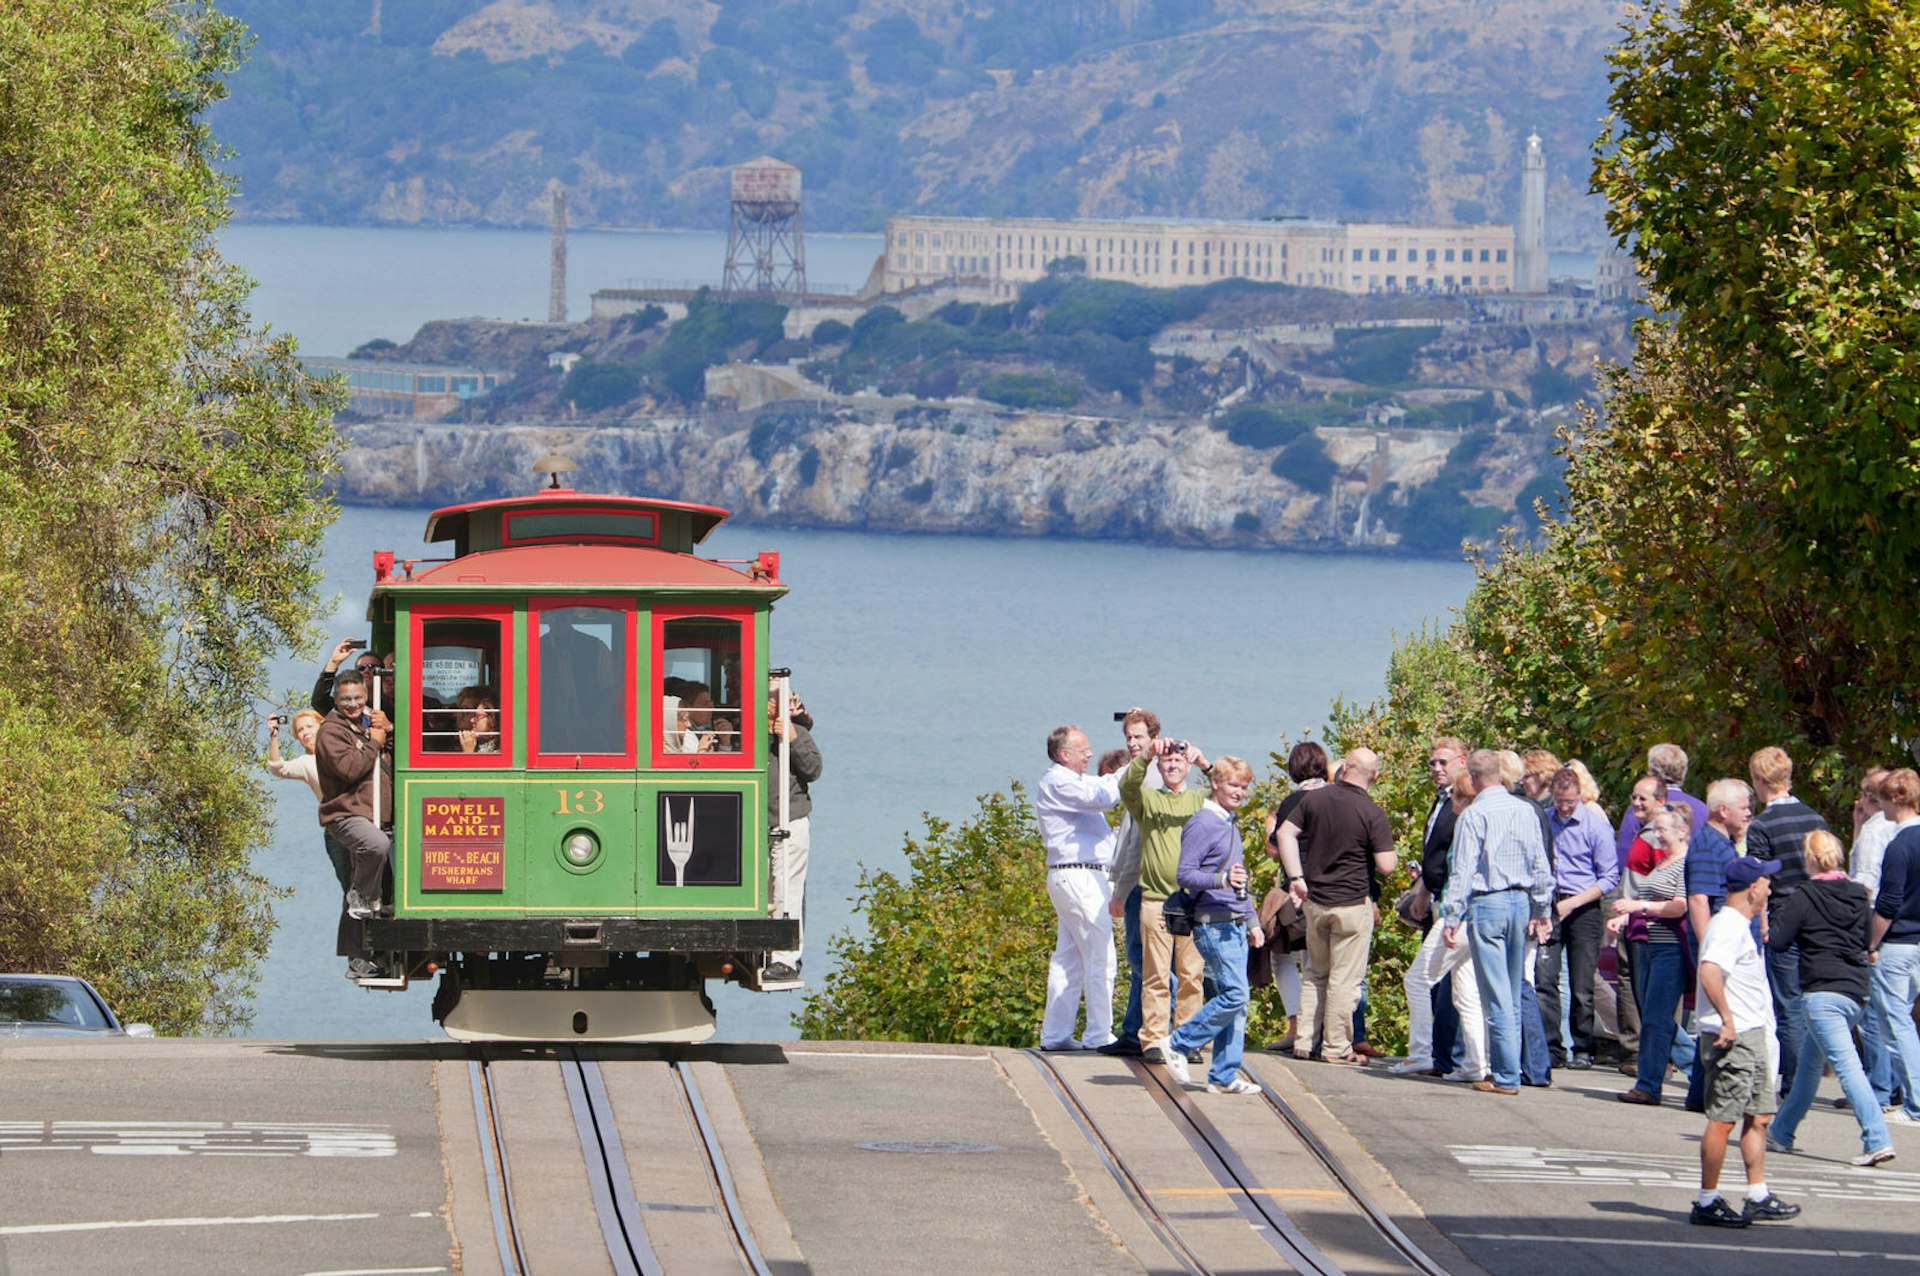 Cable car at Lombard Street with Alcatraz Island